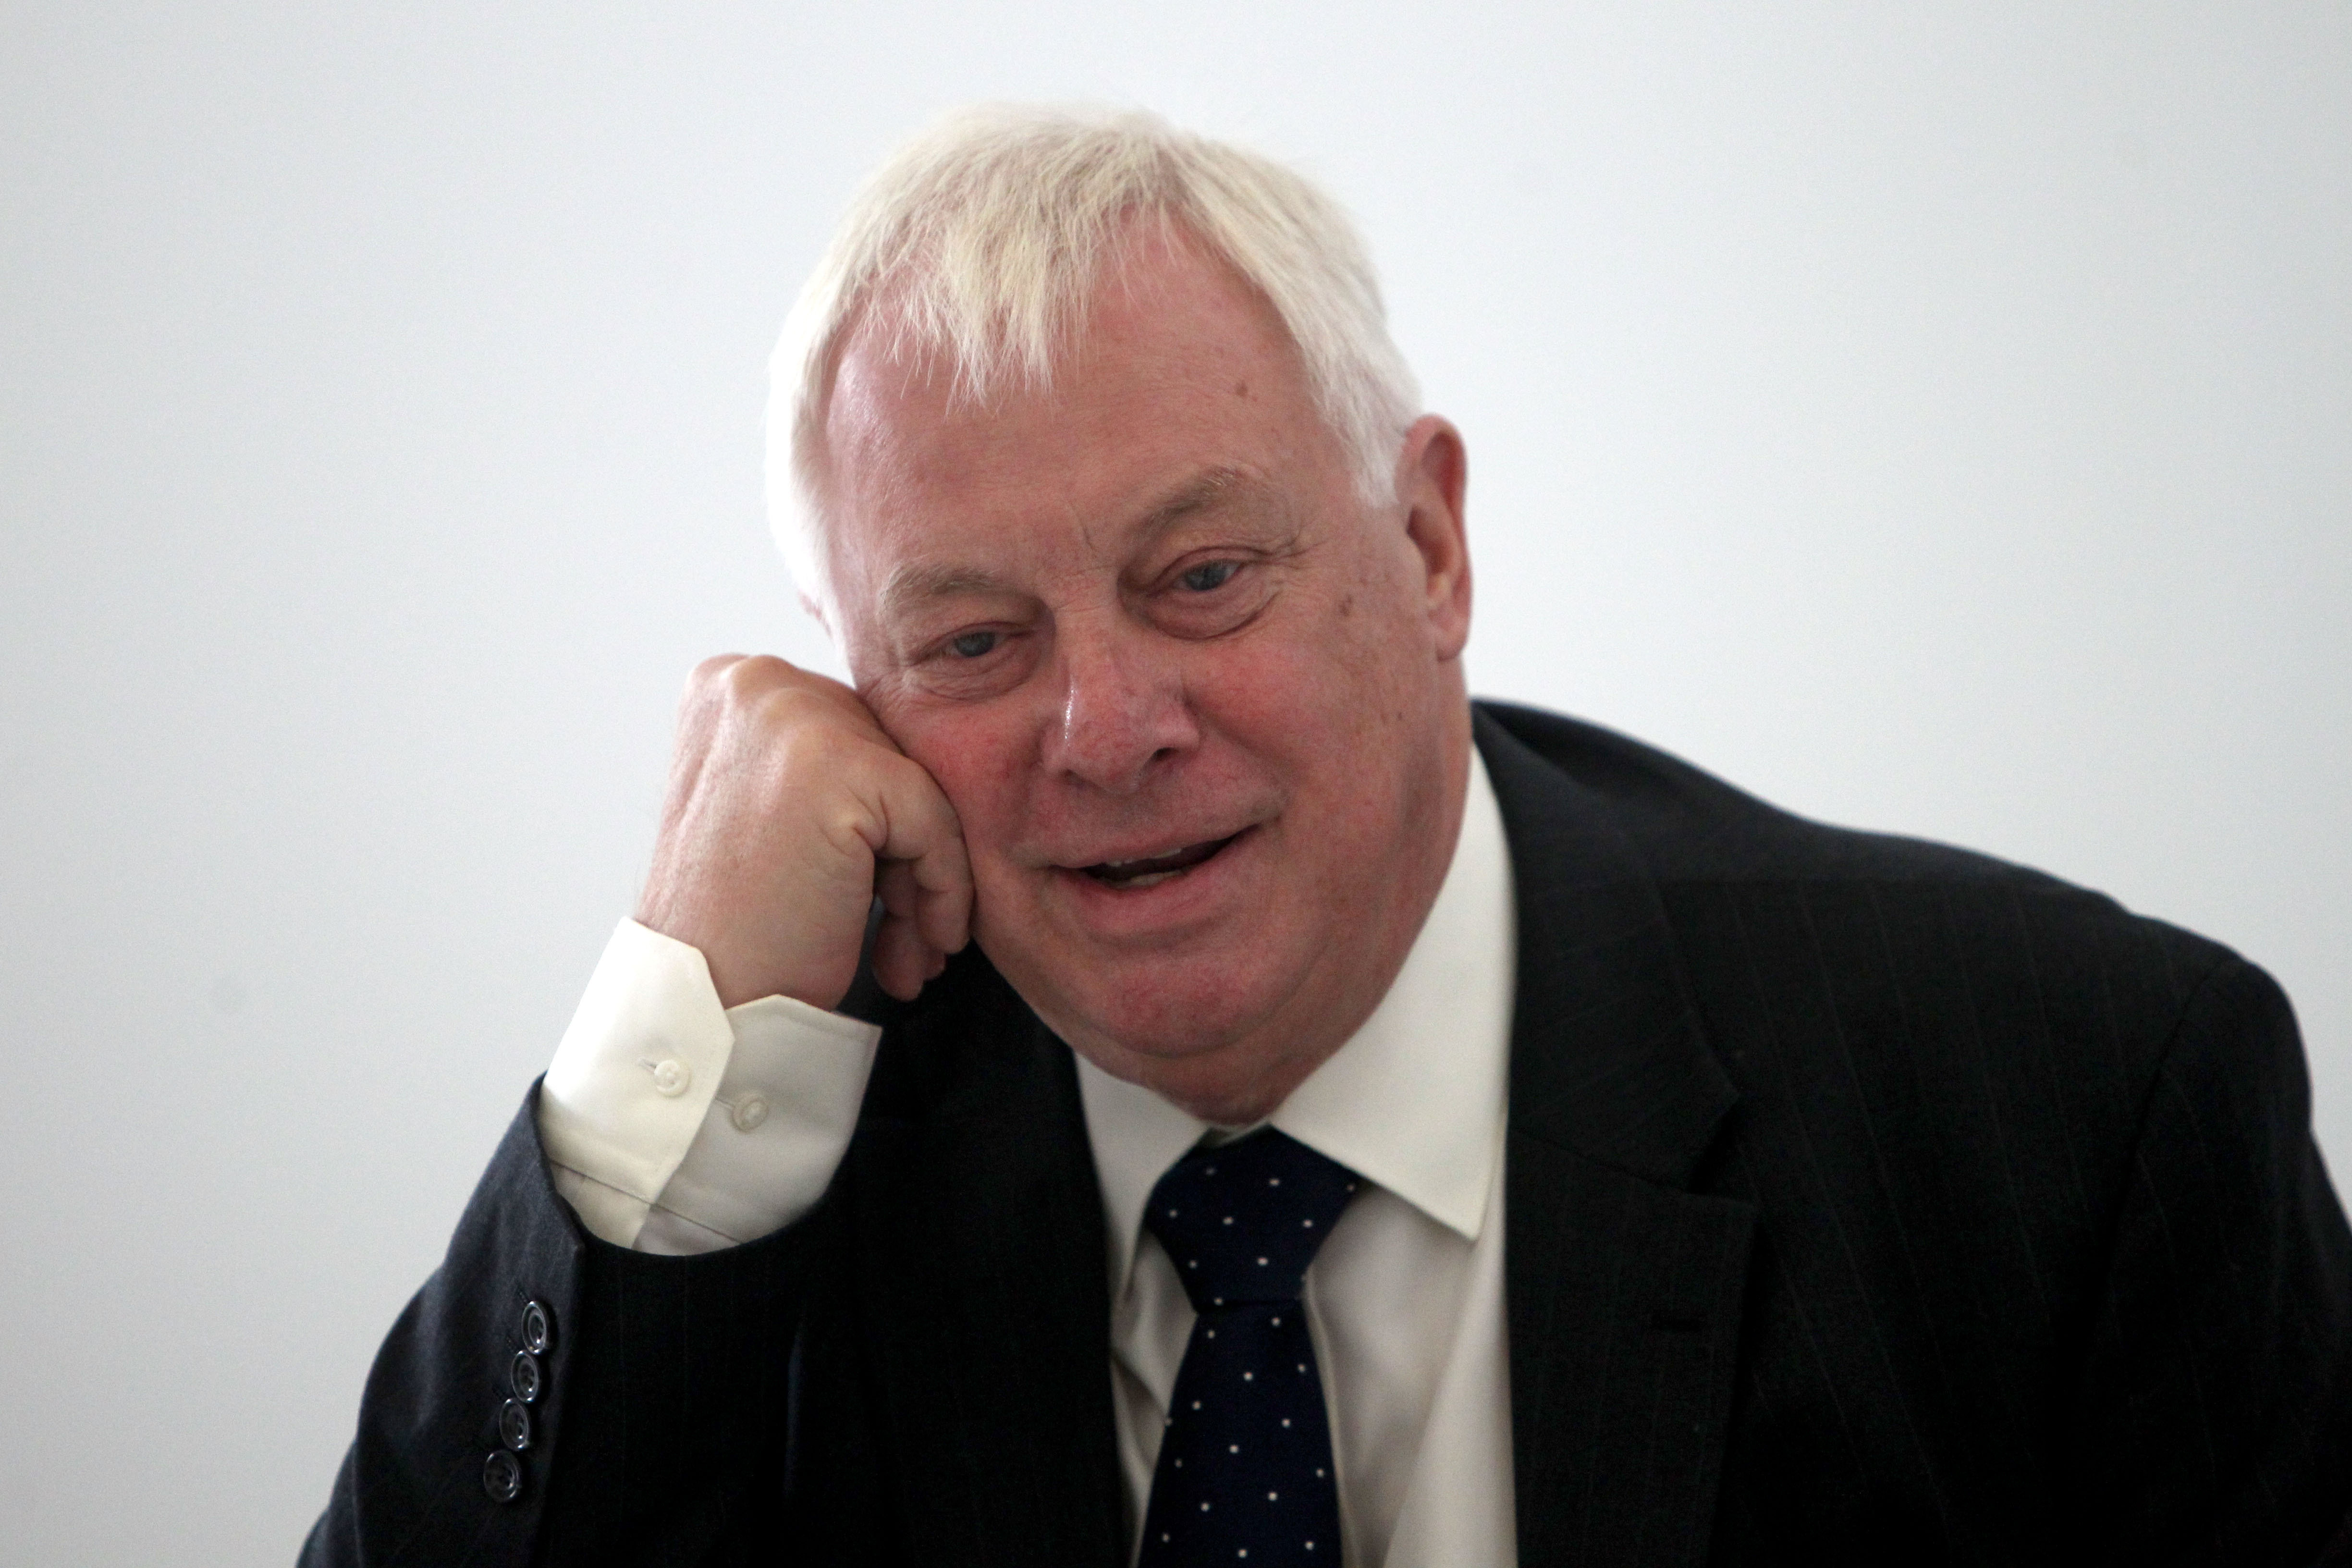 <strong>Lord&nbsp;Patten backed Remain in the EU referendum</strong>